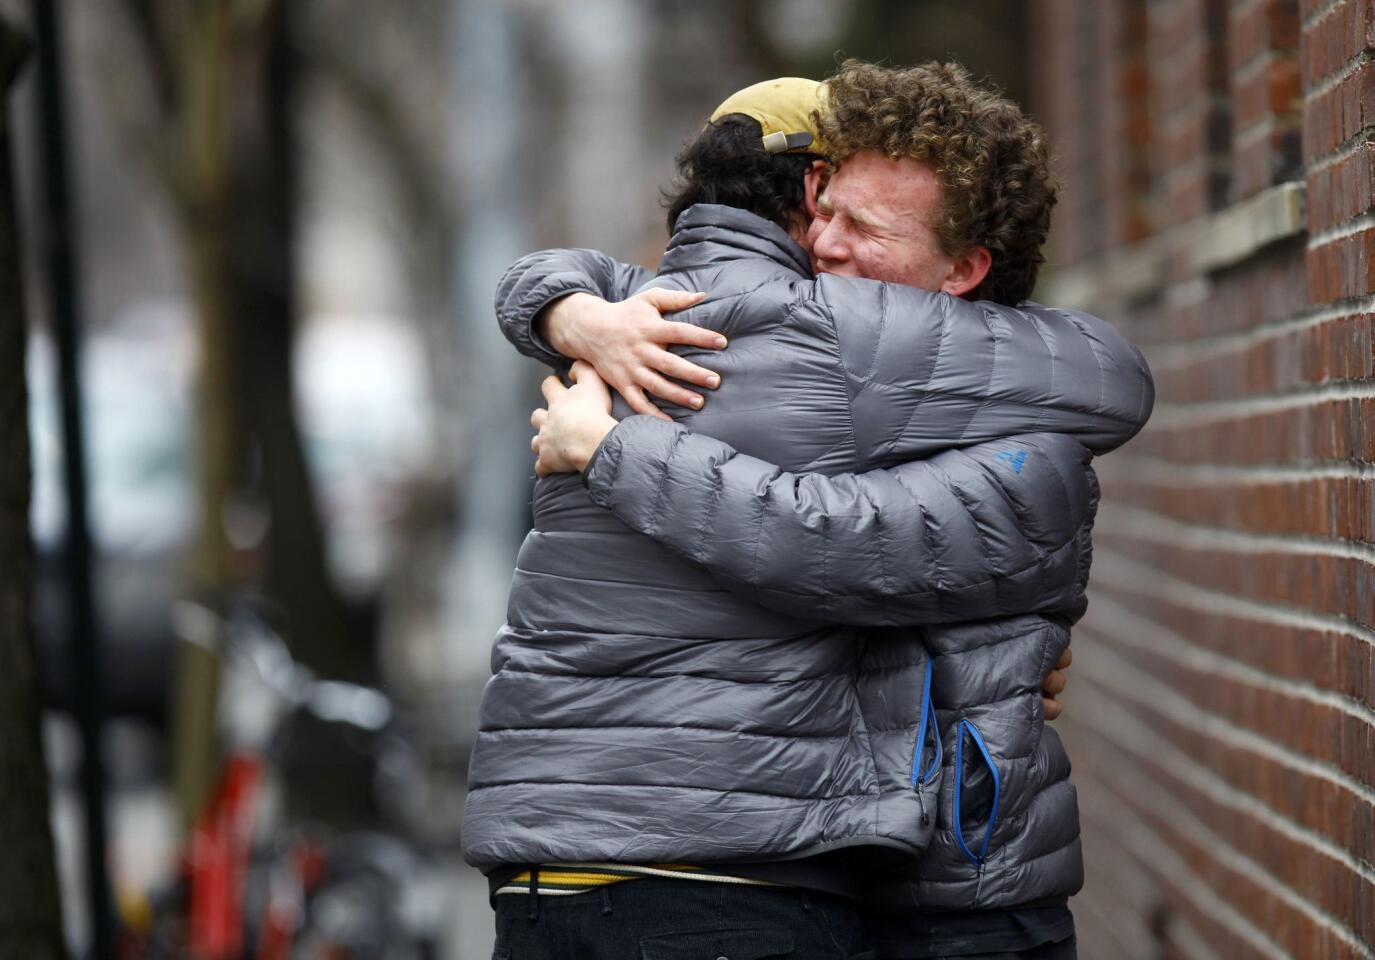 Two men embrace near the apartment where Philip Seymour Hoffman was found dead